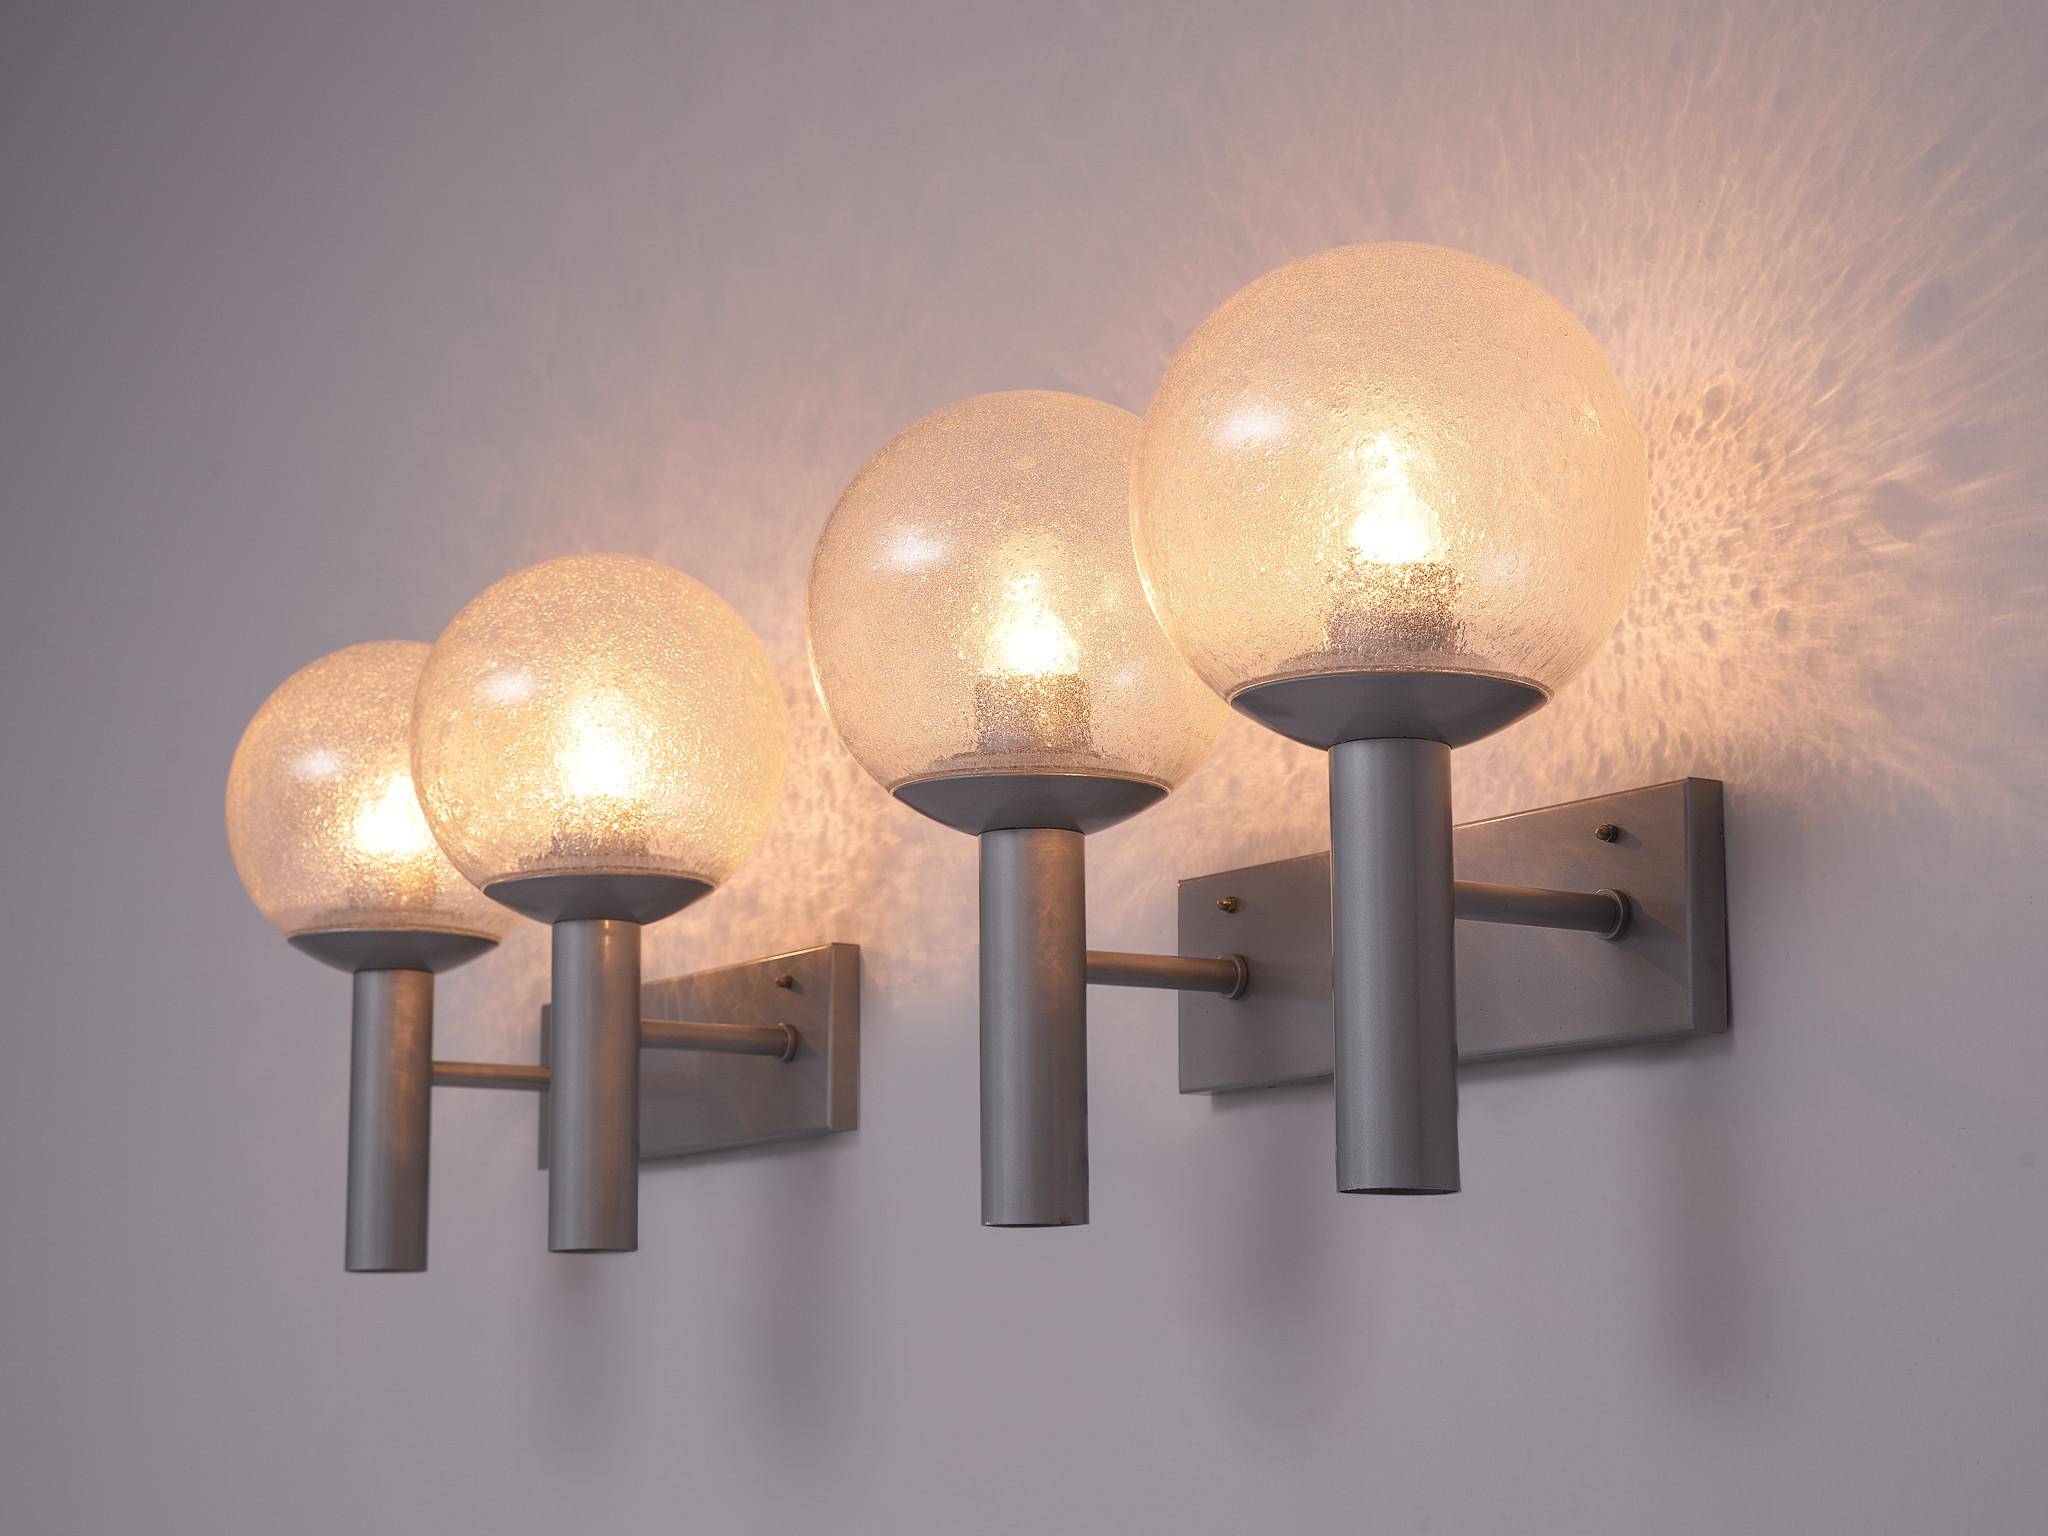 RAAK, wall sconces, model 'C-1663' Vigilante, metal, glass, Europe, 1960s.

These lights have a simplistic design. Its strength is in the combination of the forms and materials. The fixture consists of a plate to which two tubes are connected that